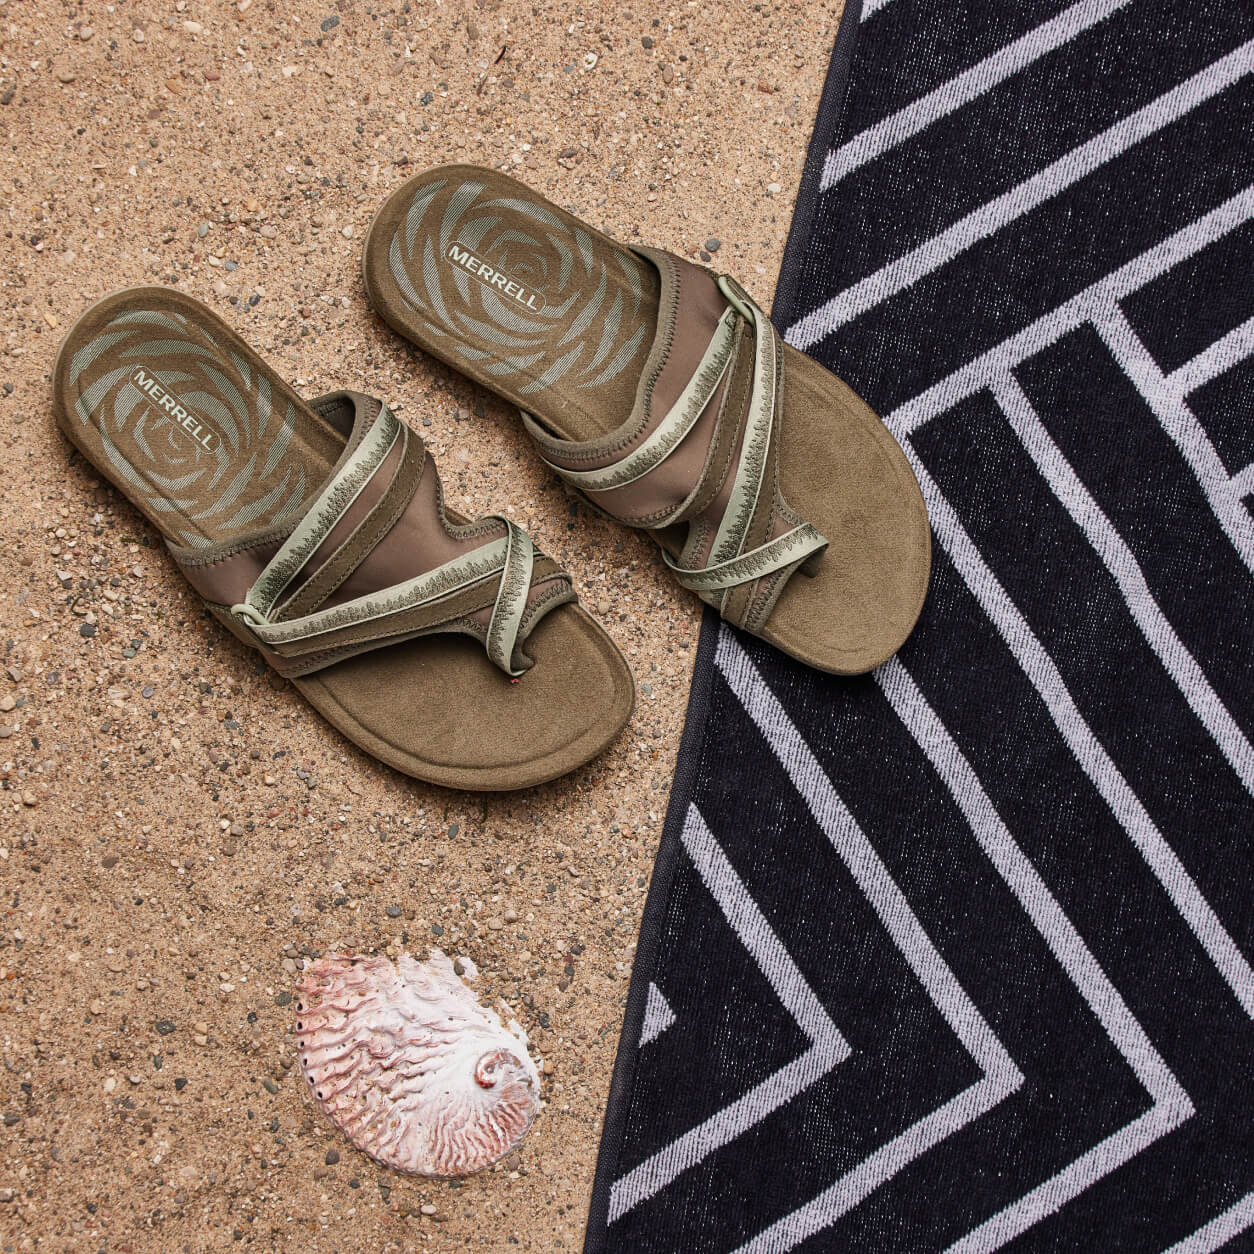 Sandals at the beach, next to a sea shell and a beach towel.